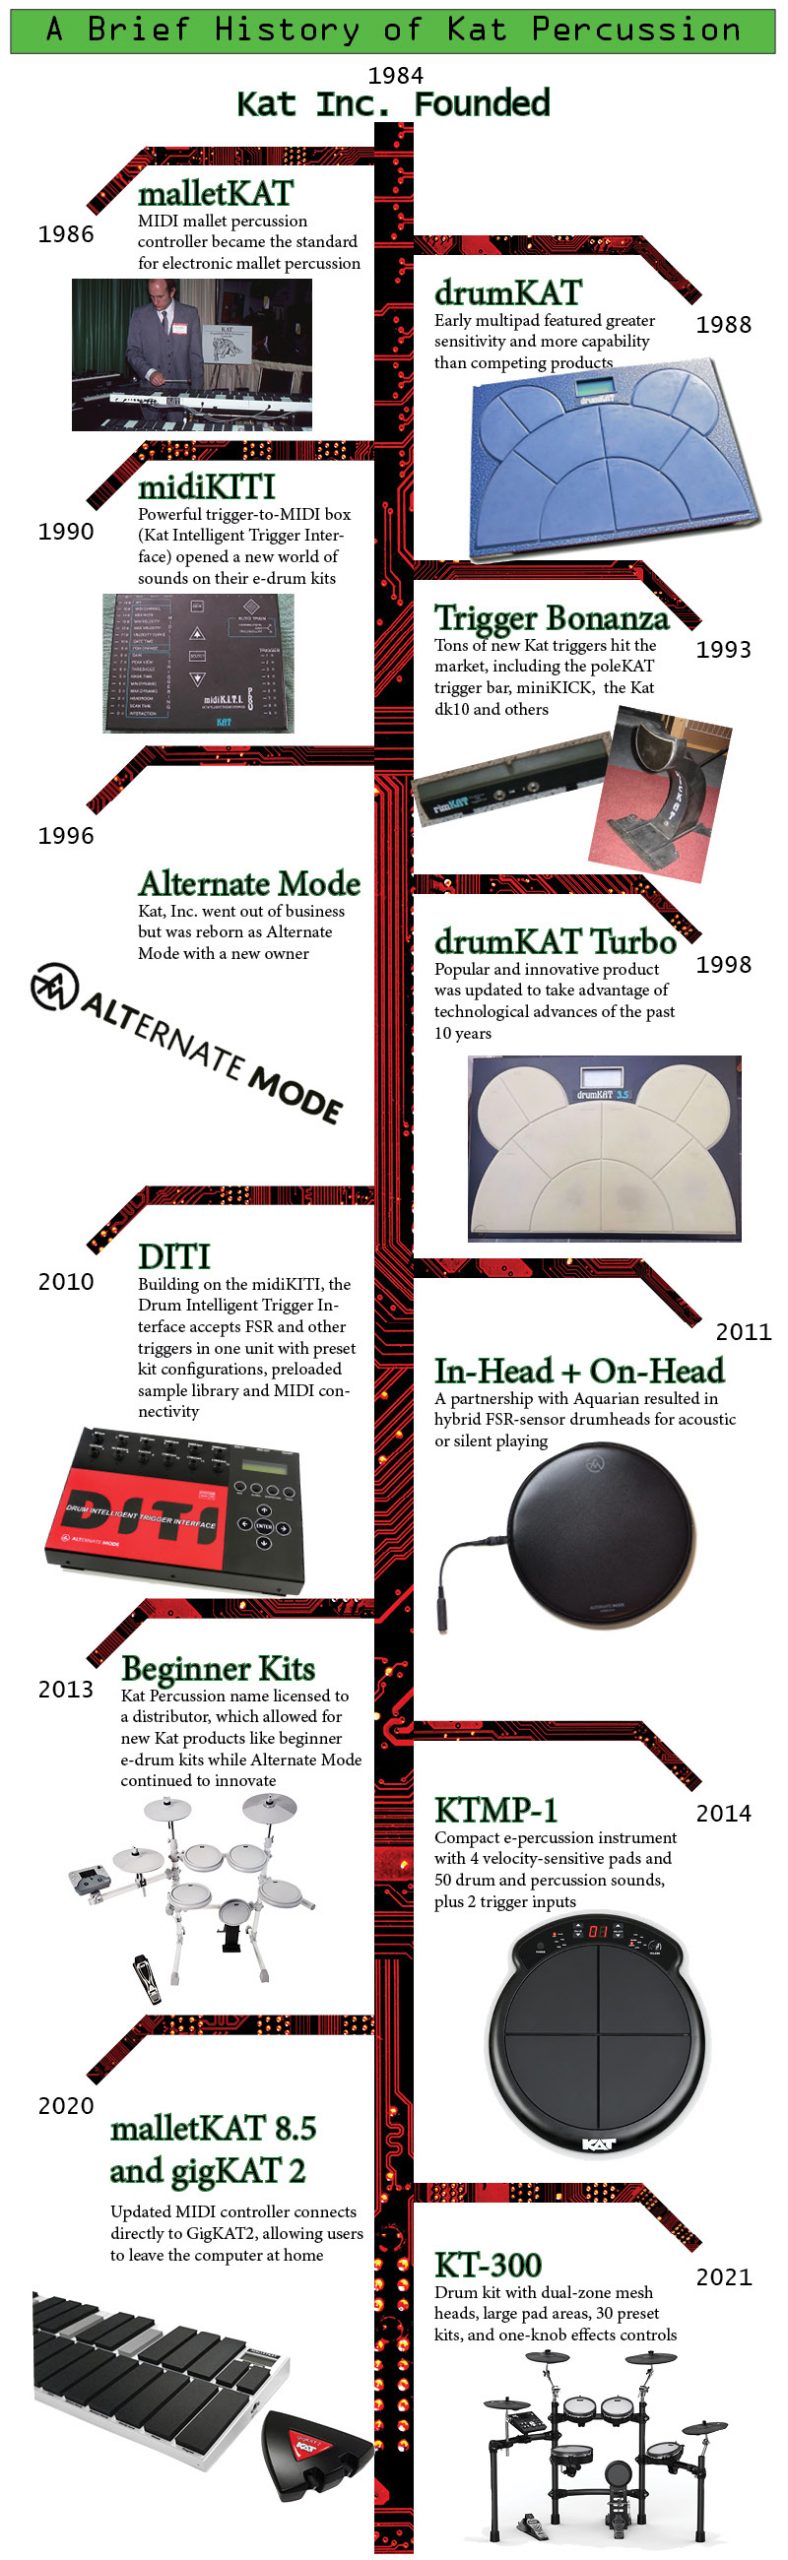 kat percussion brief history timeline